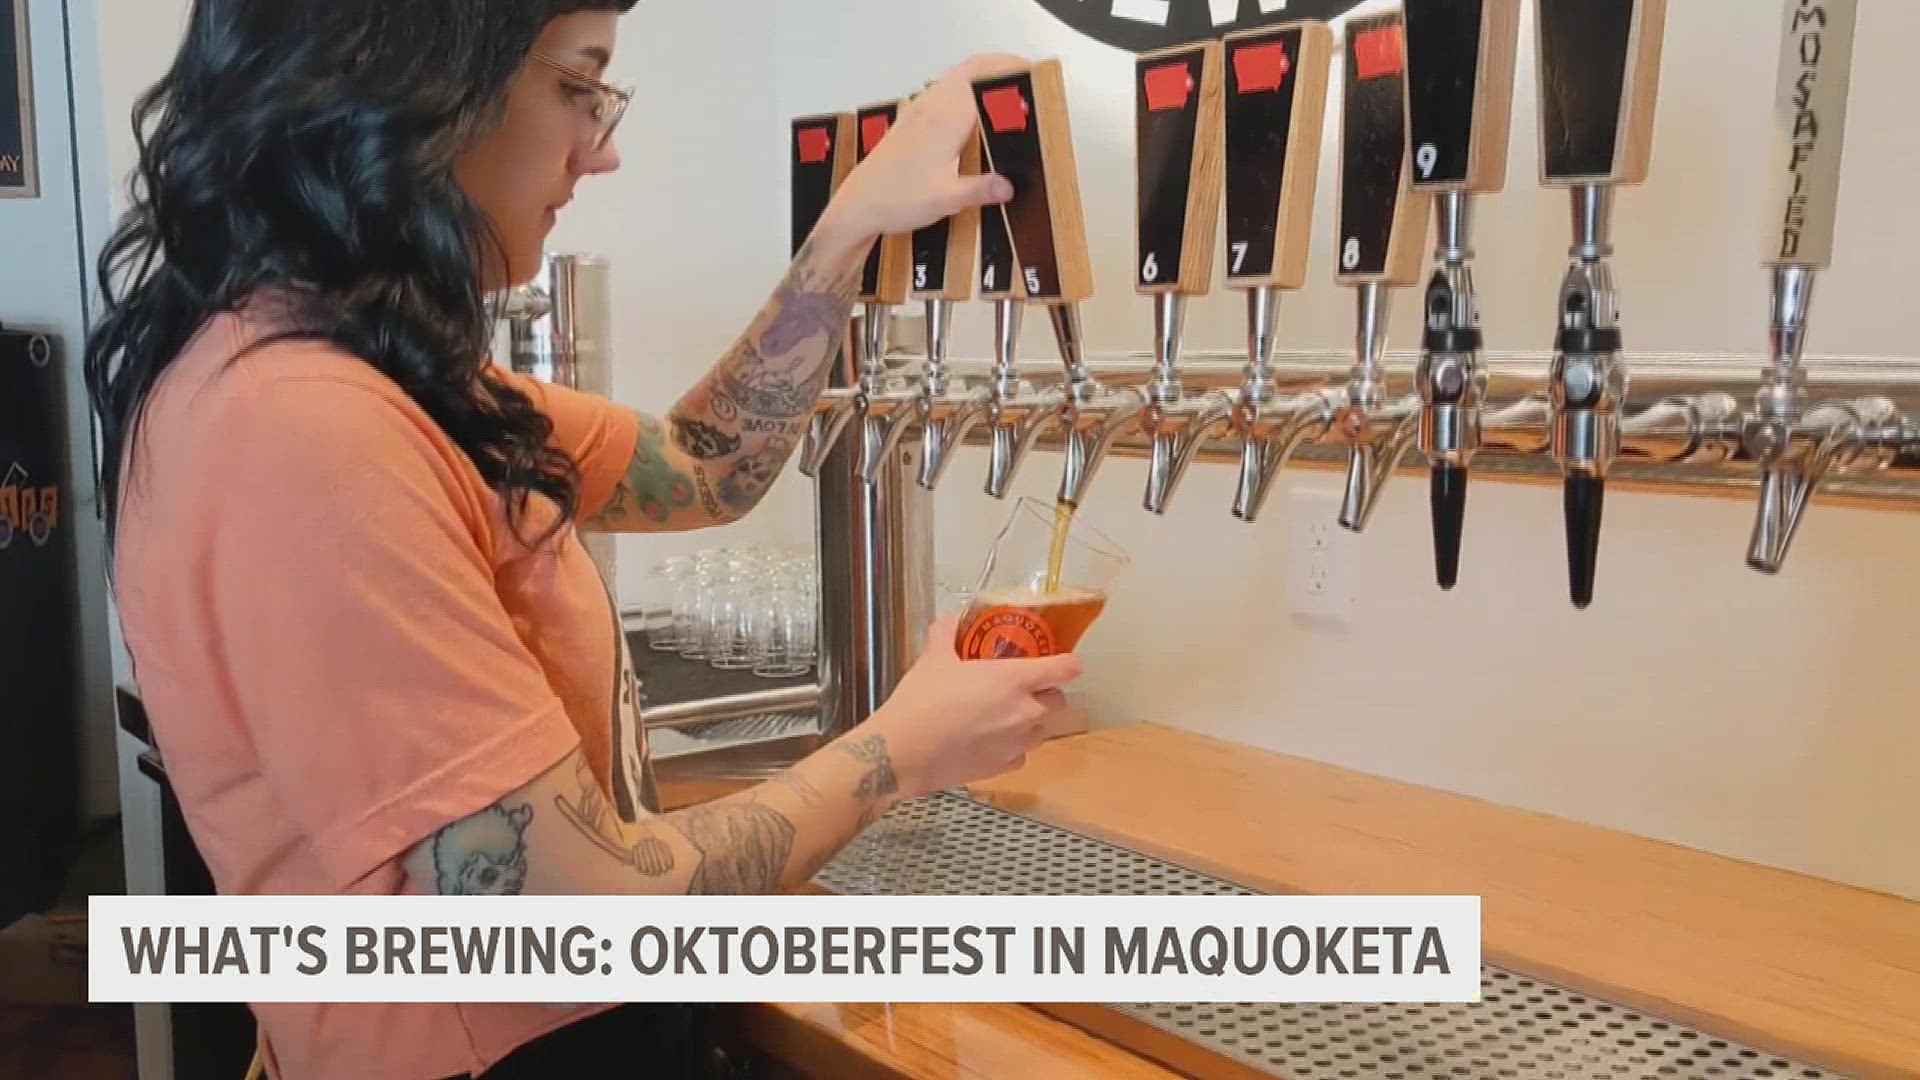 Maquoketa Brewing has plenty of events and beers planned out this fall, from Thirsty Thursdays to Oktoberfest on Saturday, Sept. 17.